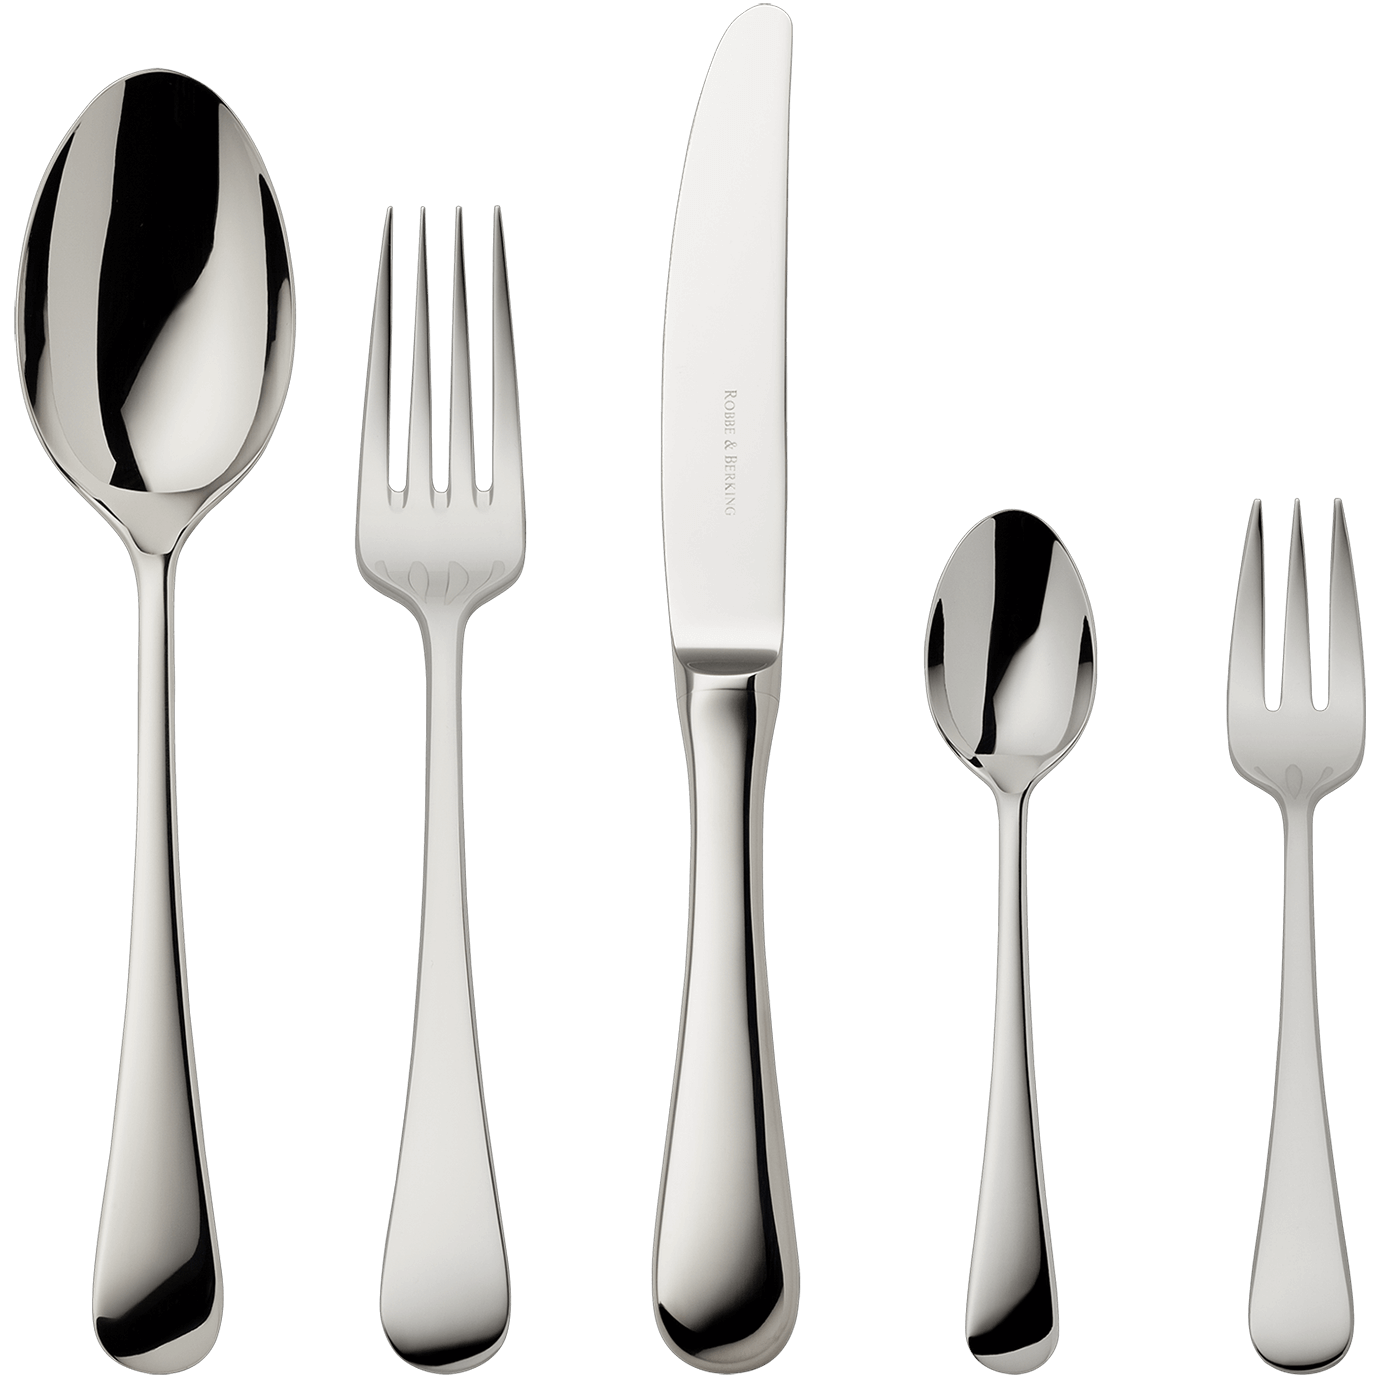 Como 5-piece place setting (18/8 stainless steel)